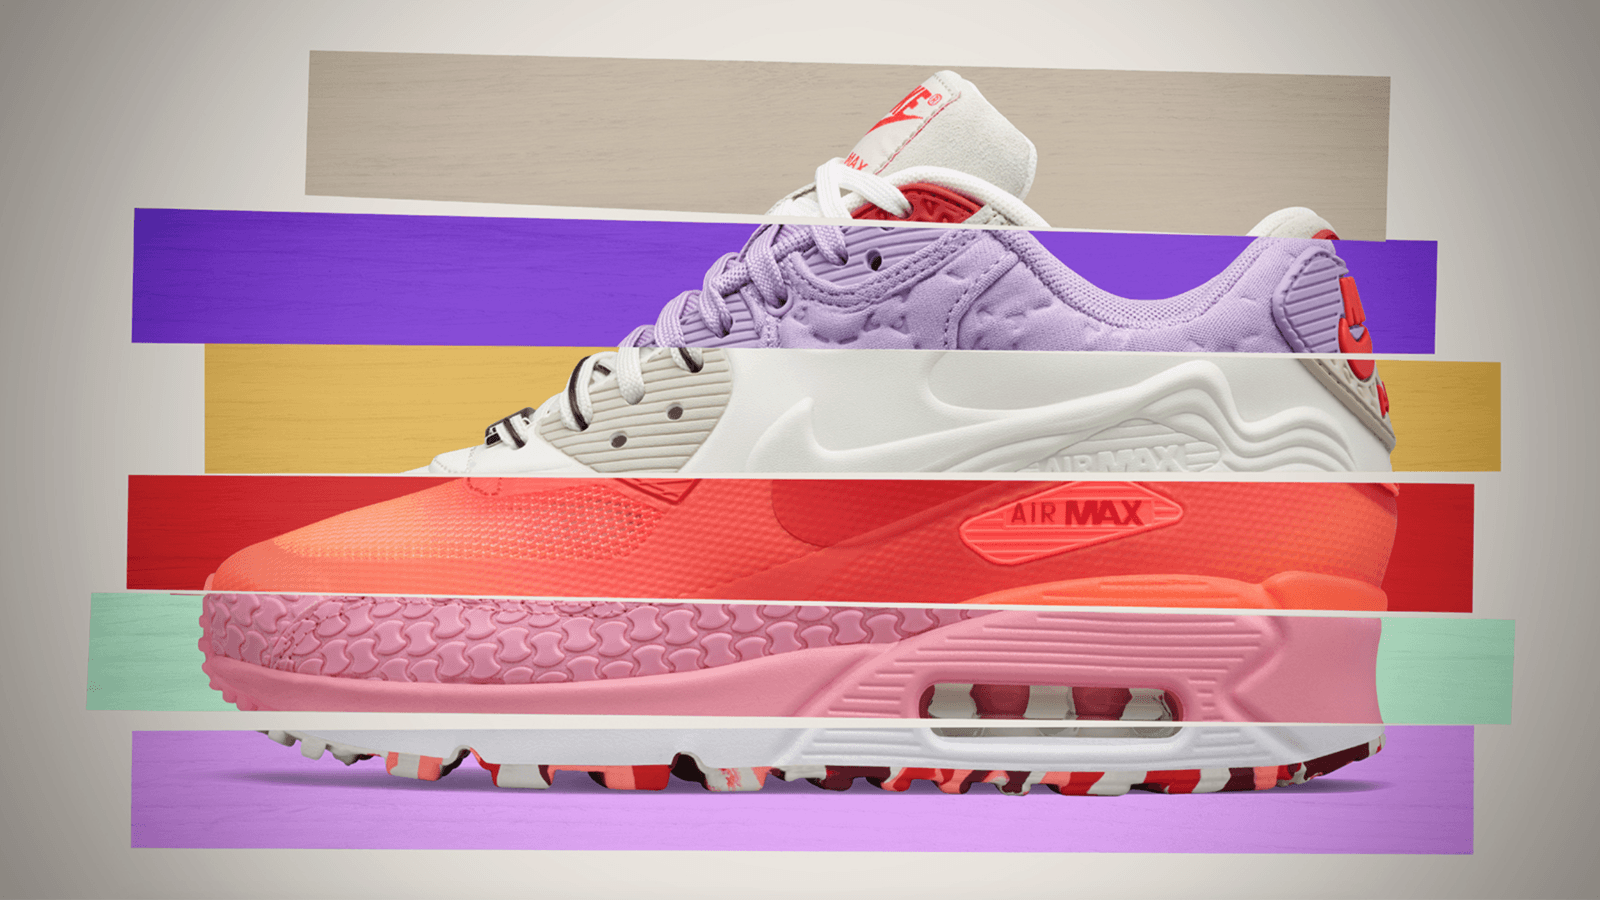 Nike Just Unveiled A New Air Max 90 City Pack Inspired By Delectable